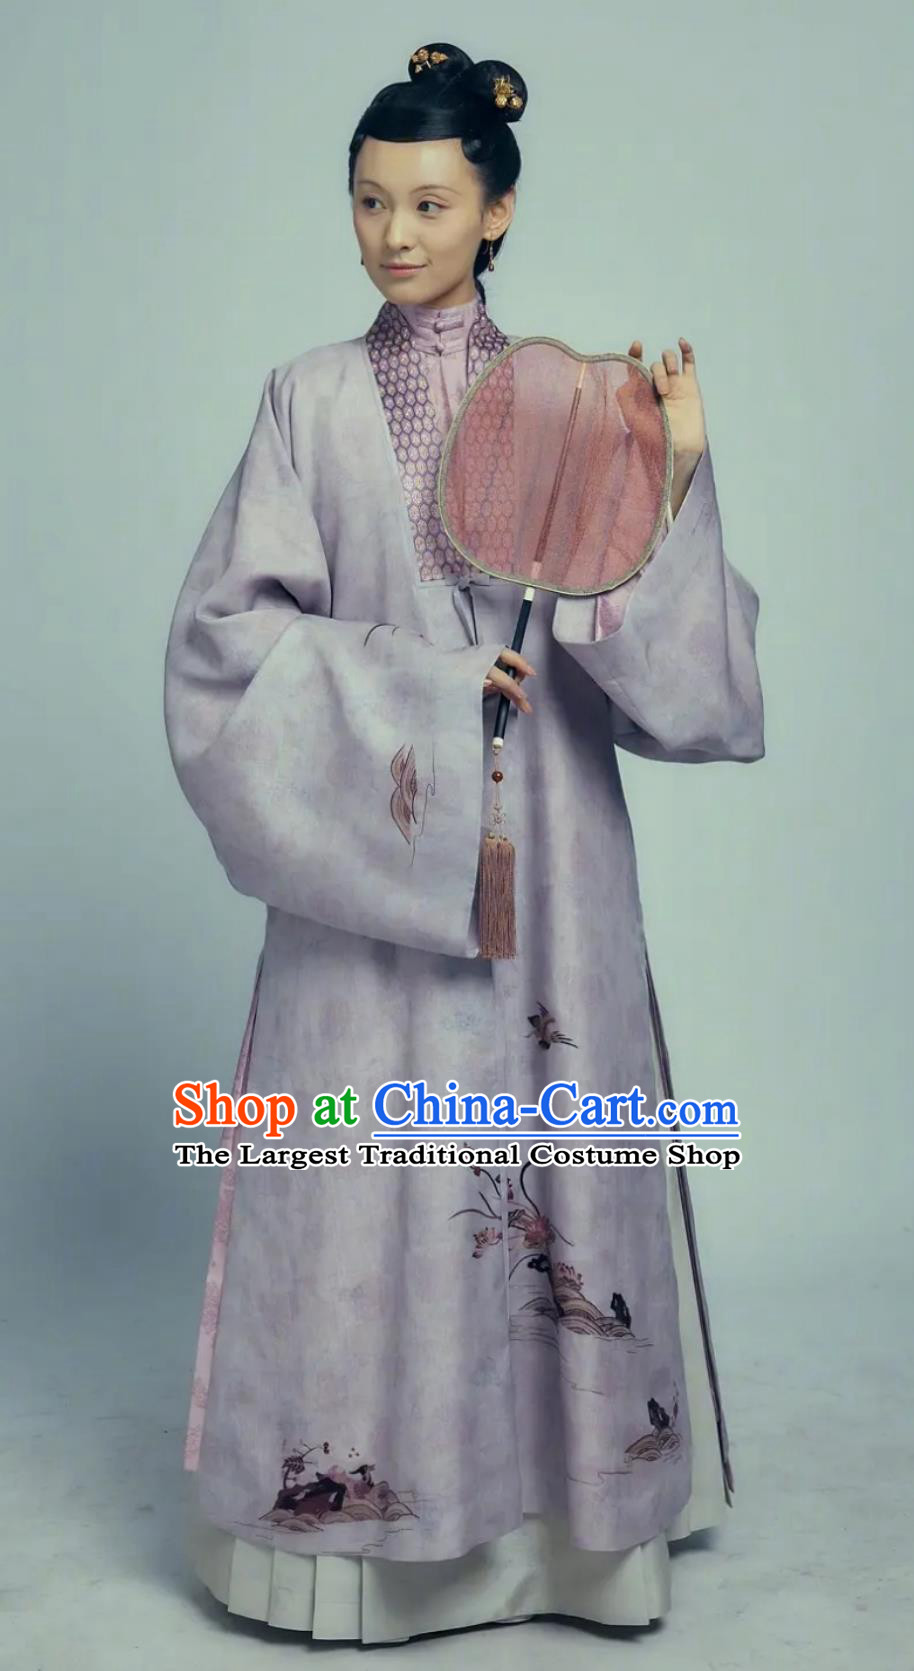 TV Series Song of Youth Concubine Tao Yao Dresses China Ming Dynasty Rich Woman Garment Costumes Ancient Hanfu Clothing